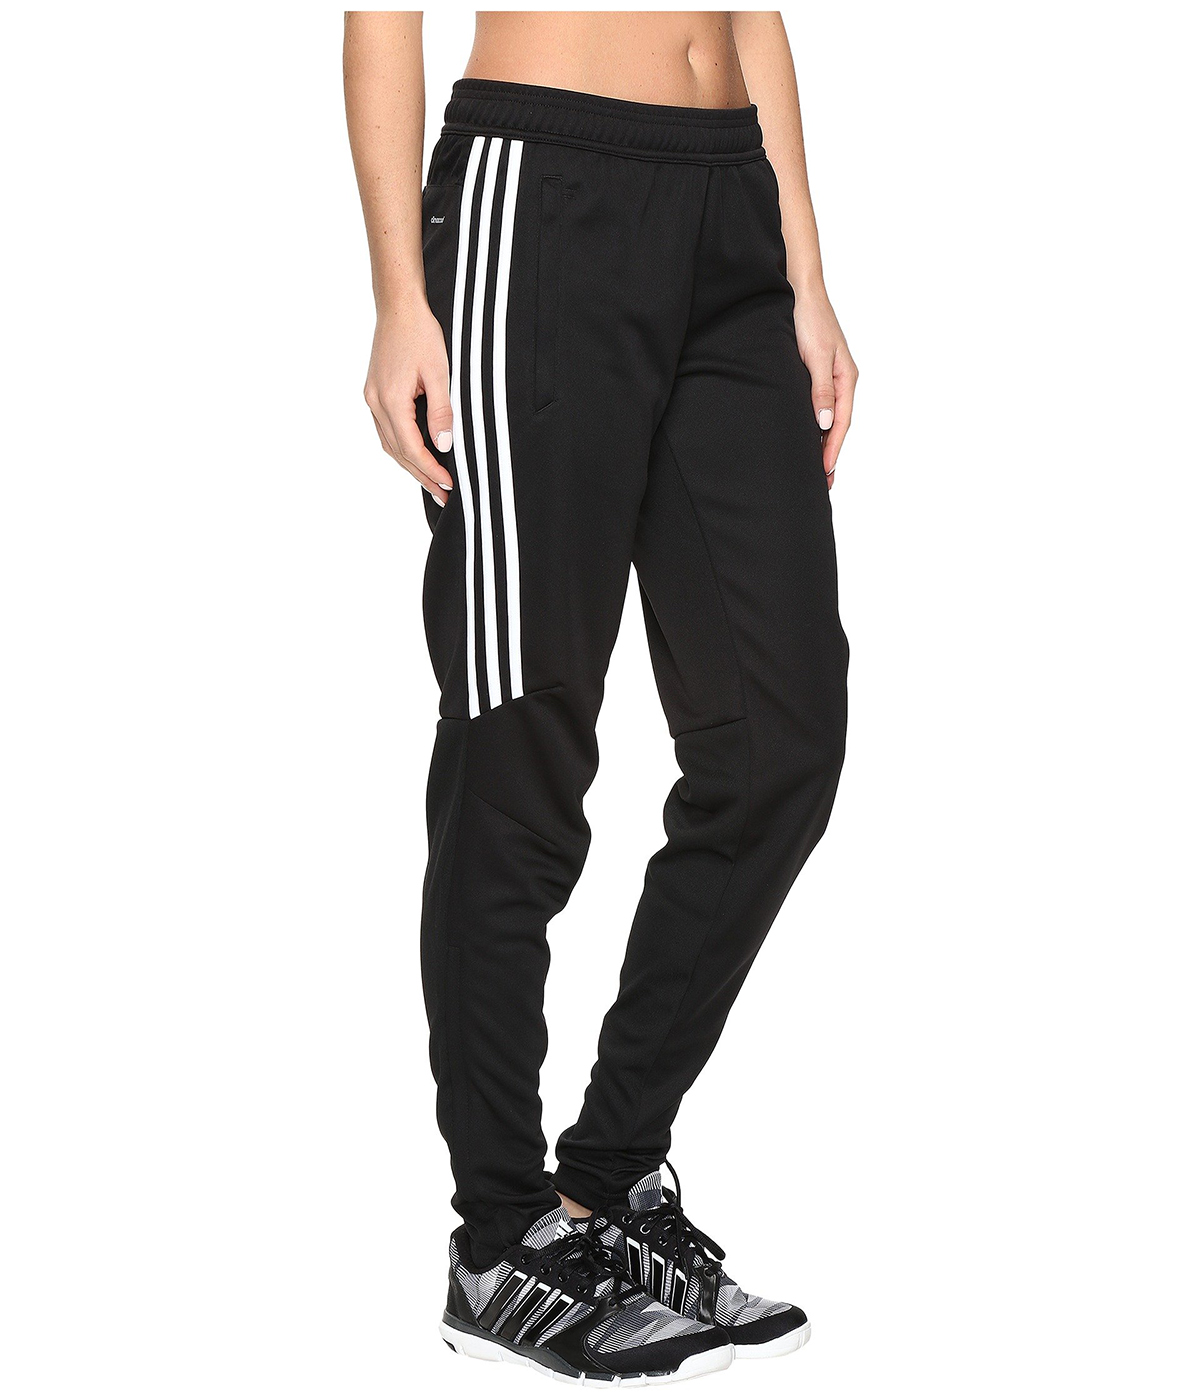 what are the adidas pants everyone wears